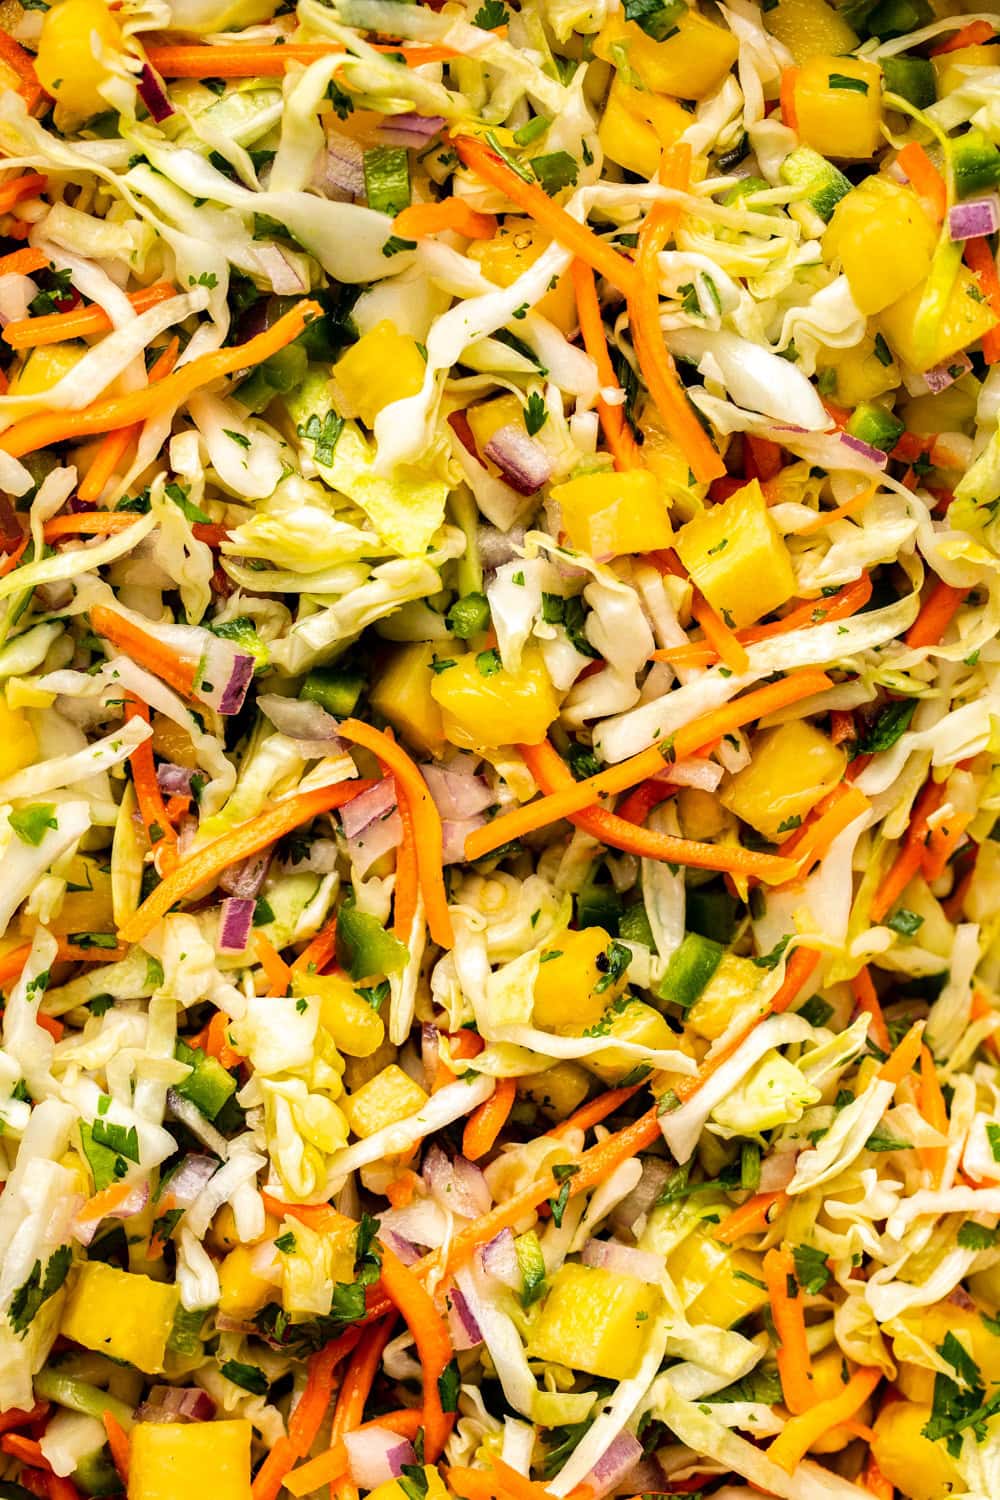 a zoomed in photo of pineapple coleslaw to show its texture